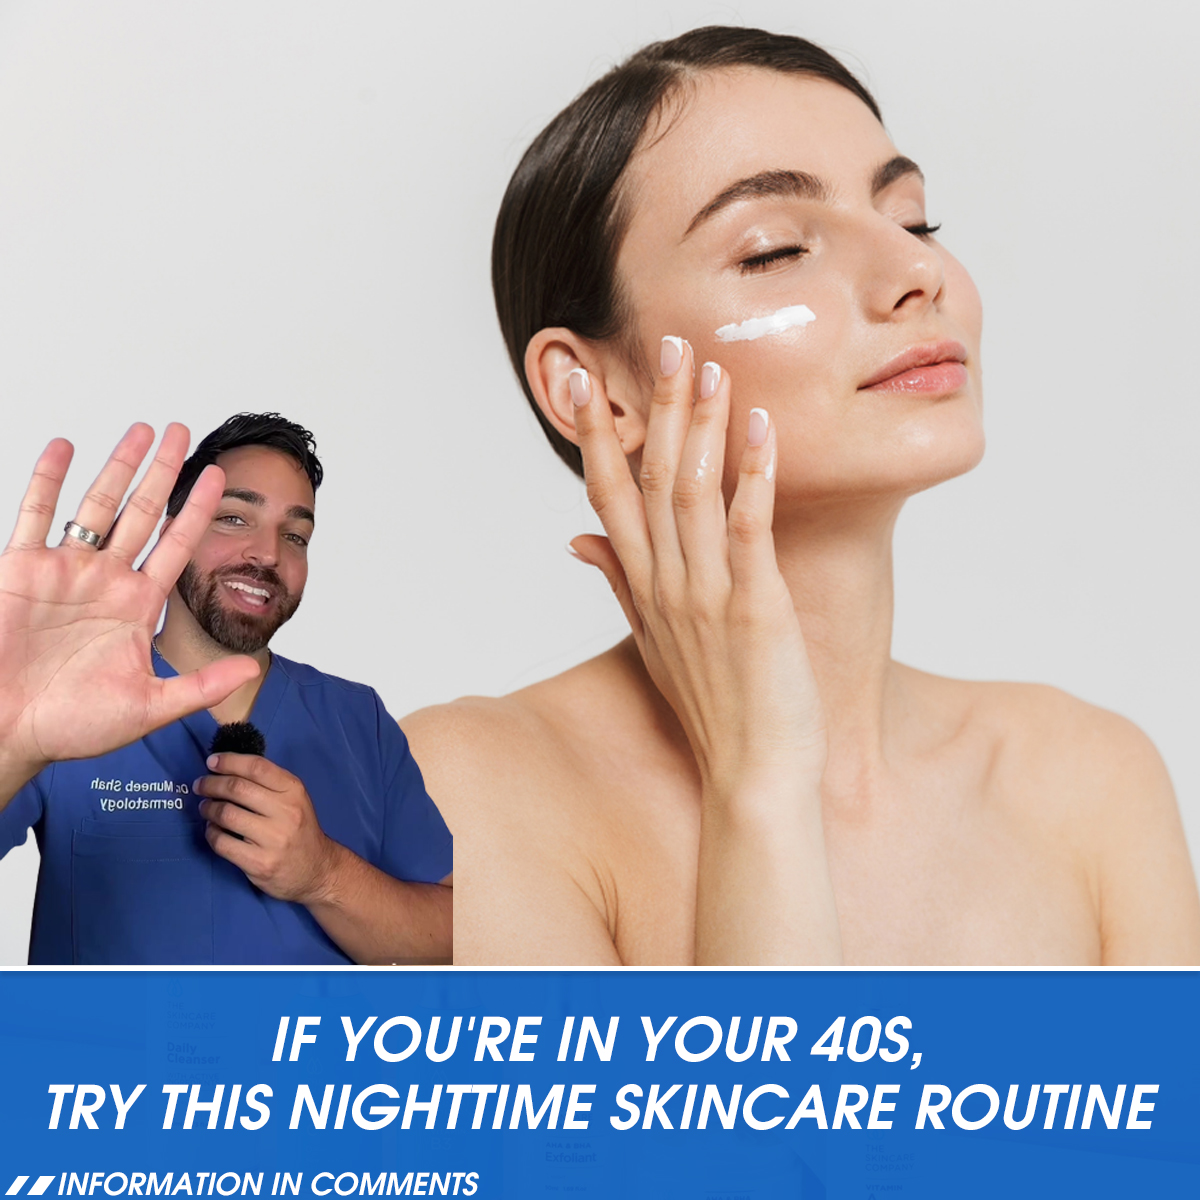 If You’re in Your 40s, Try This Nighttime Skincare Routine